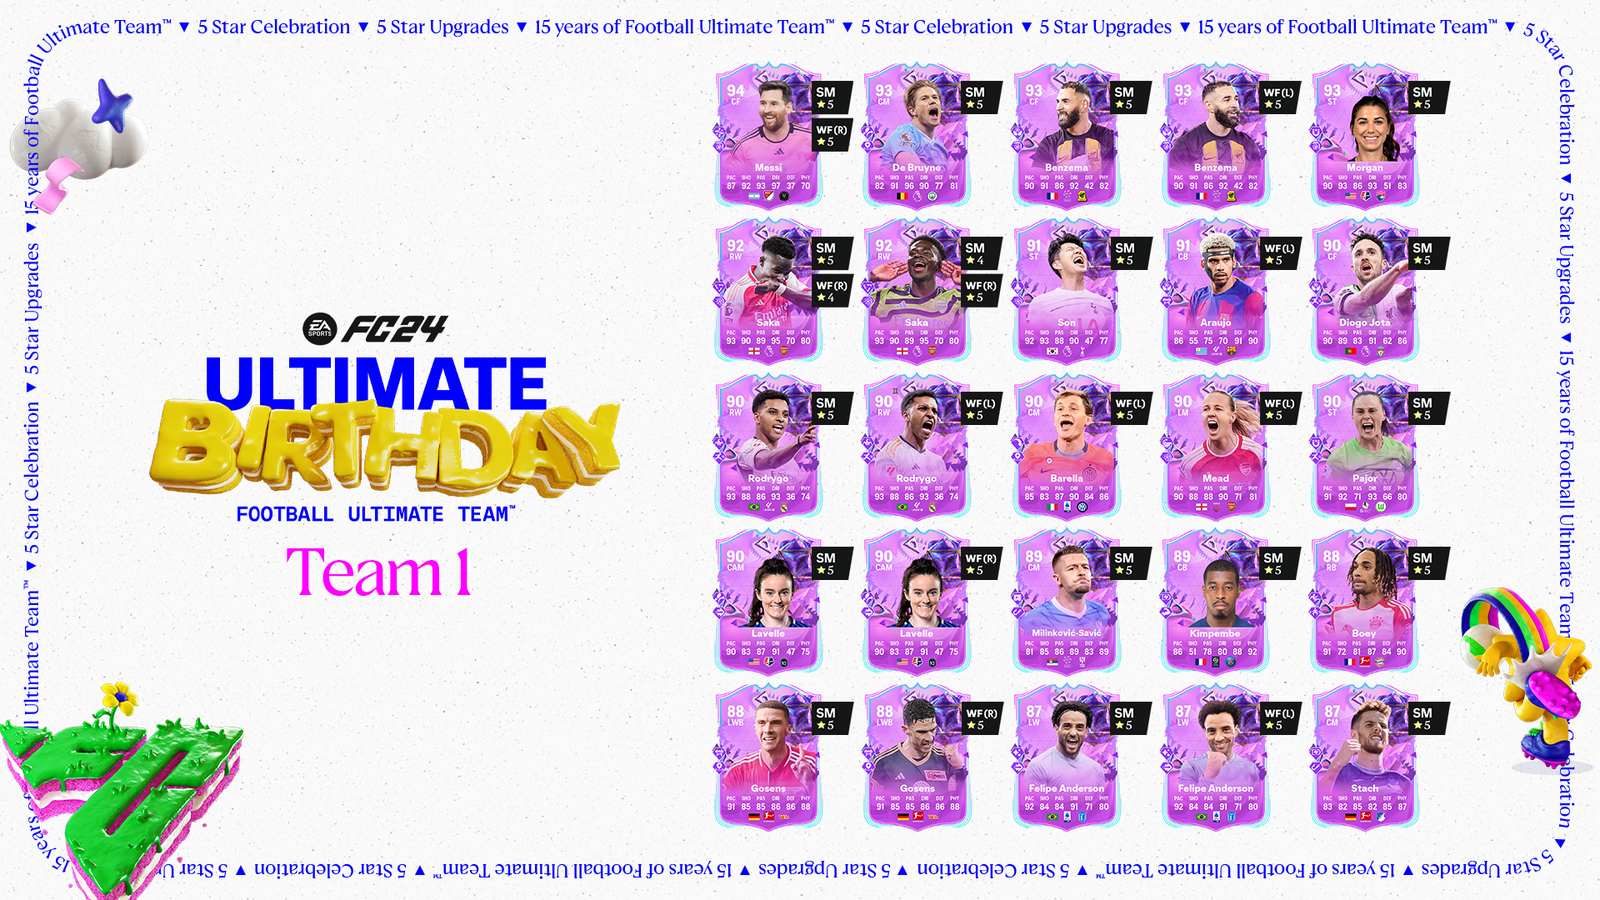 FC 24: Ultimate Birthday Team 2 Expected Tomorrow